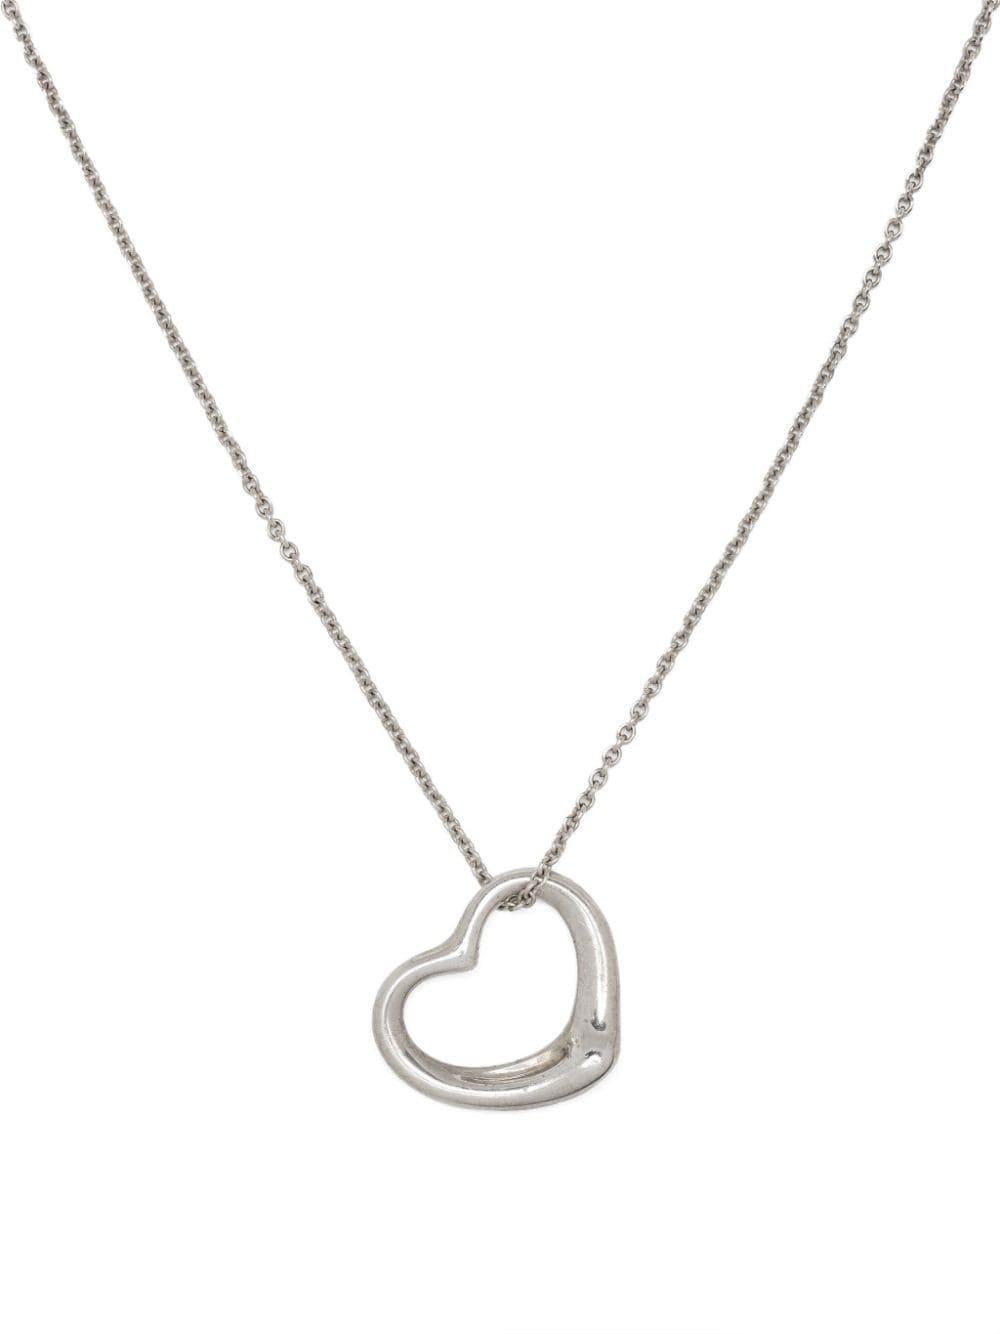 Tiffany & co x Elsa Perreti silver sterling Open Heart-pendant necklace featuring polished finish, heart pendant, engraved logo, cable-link chain, spring-ring fastening. 
Length 16.1in (41 cm)
Pendant Length 0.8in ( 2.1cm)
Circa: 1980s
In good